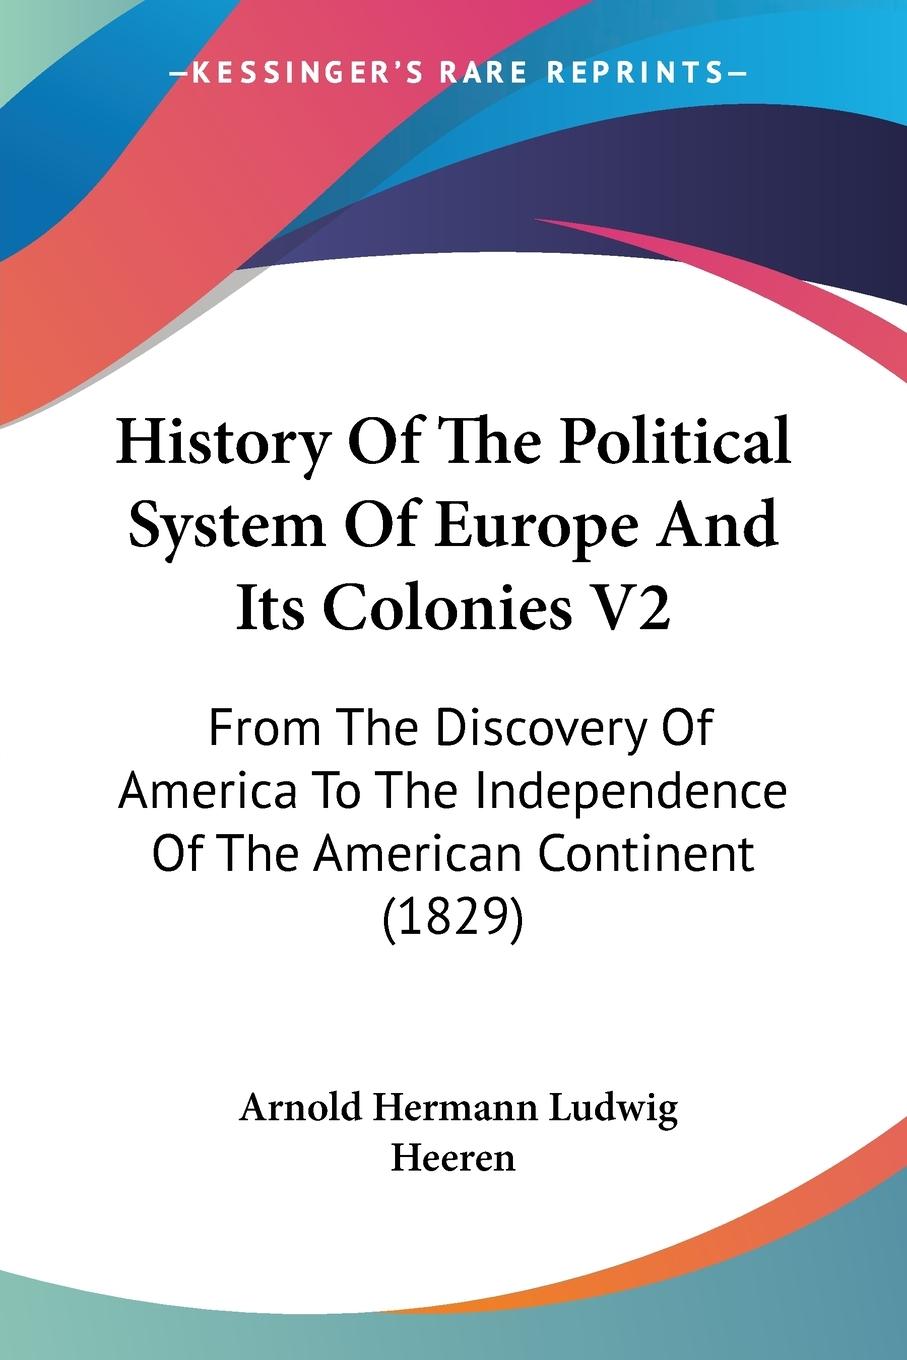 History Of The Political System Of Europe And Its Colonies V2 - Heeren, Arnold Hermann Ludwig